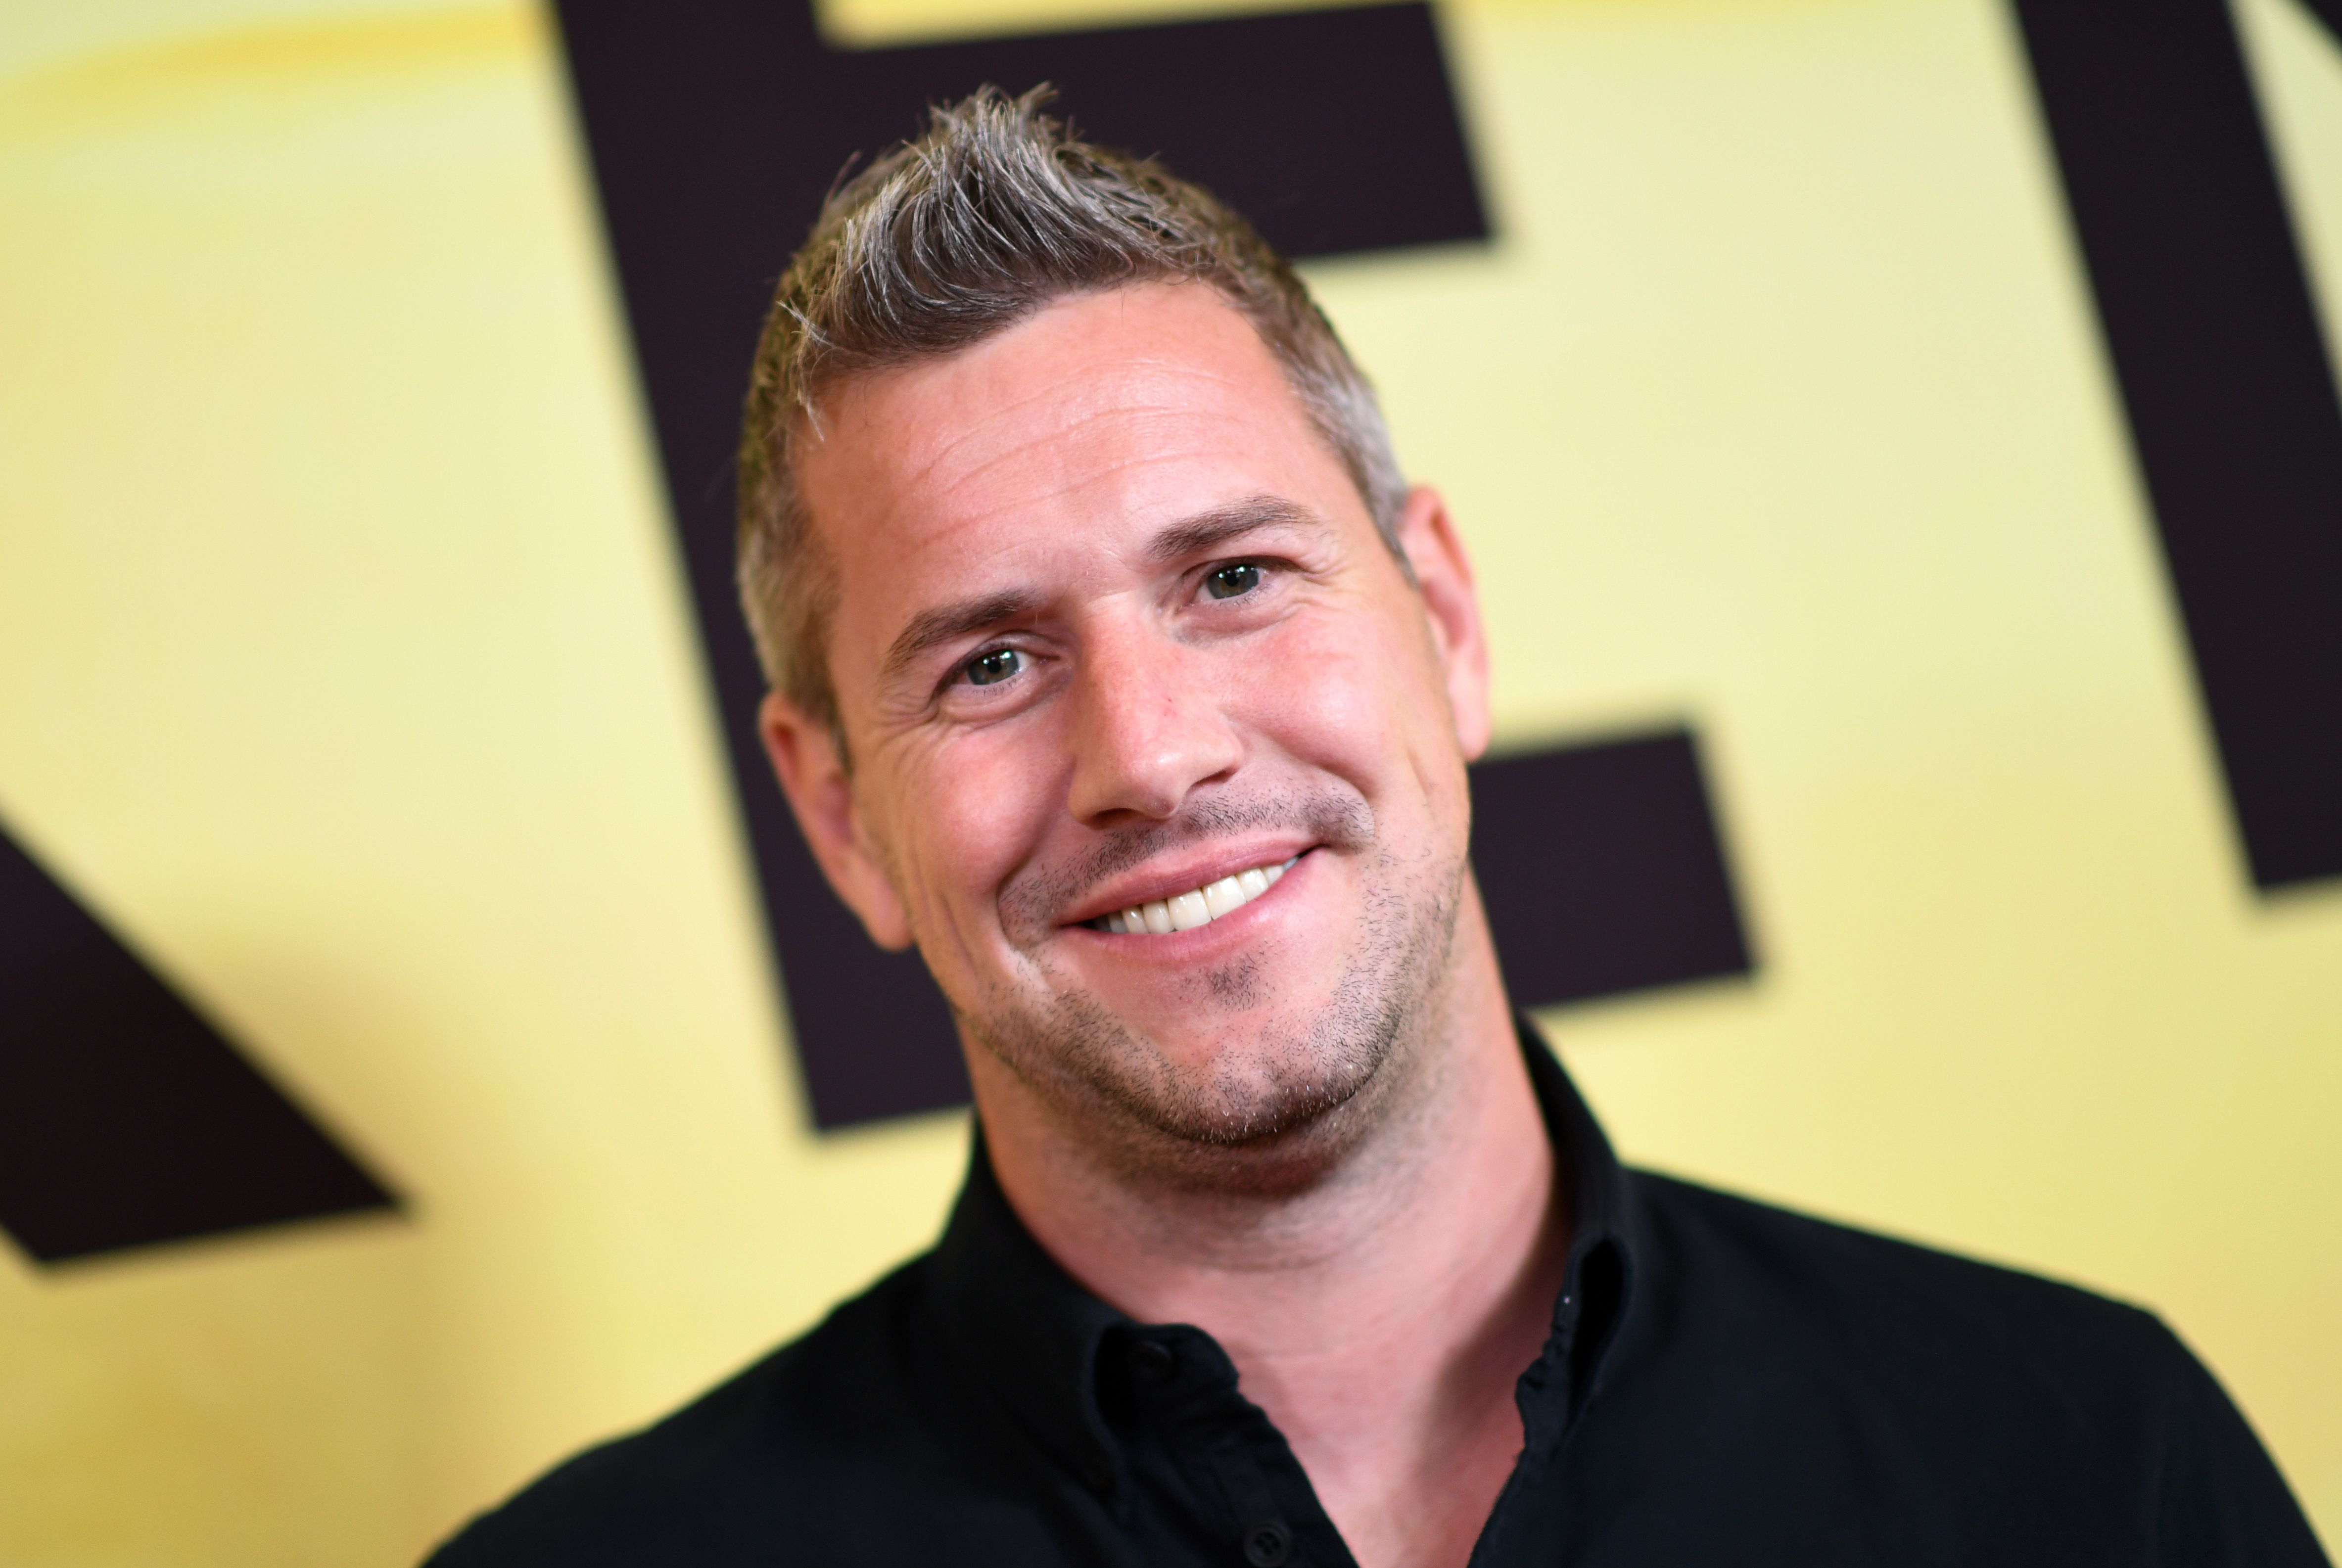 Ant Anstead at the special screening of "Serengeti" in Beverly Hills, California, on July 23, 2019. | Source: Getty Images